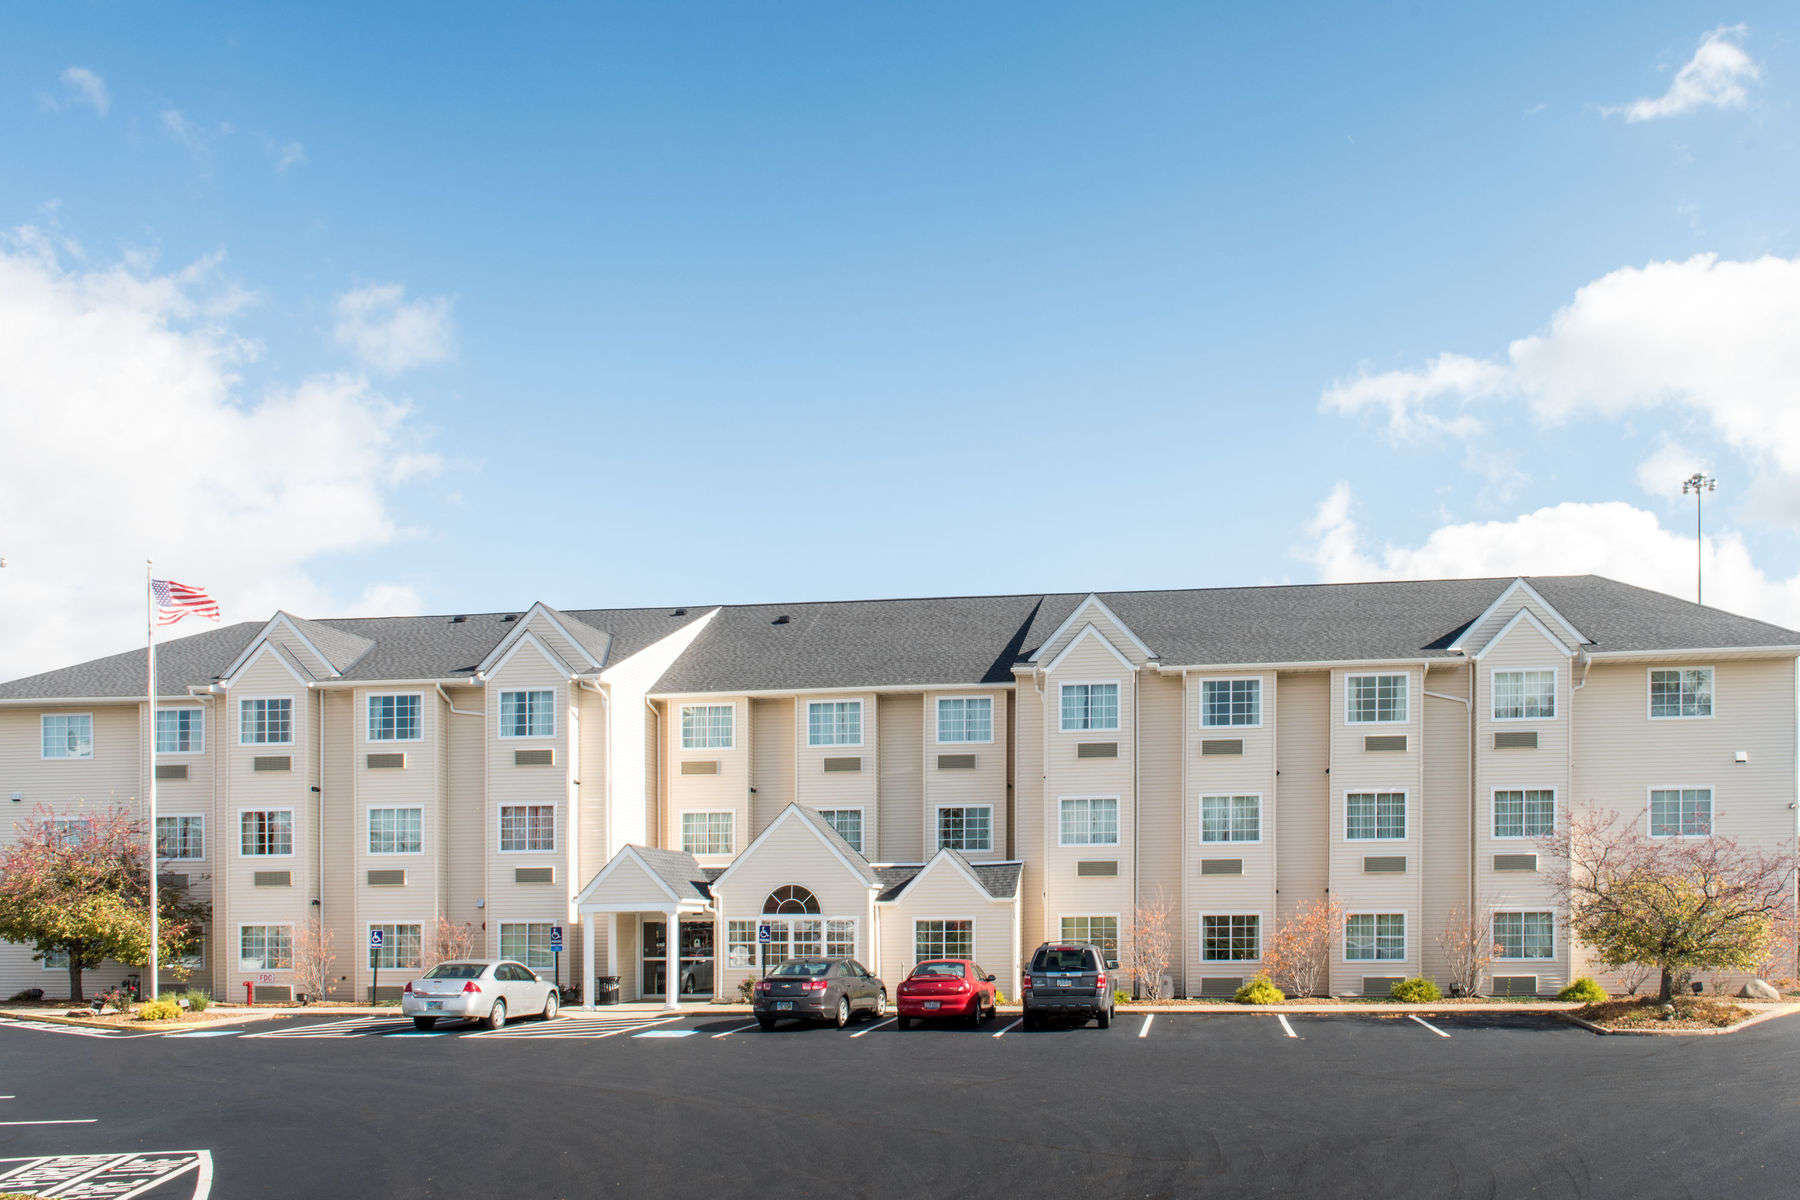 Photo of Microtel Inn & Suites by Wyndham North Canton, North Canton, OH